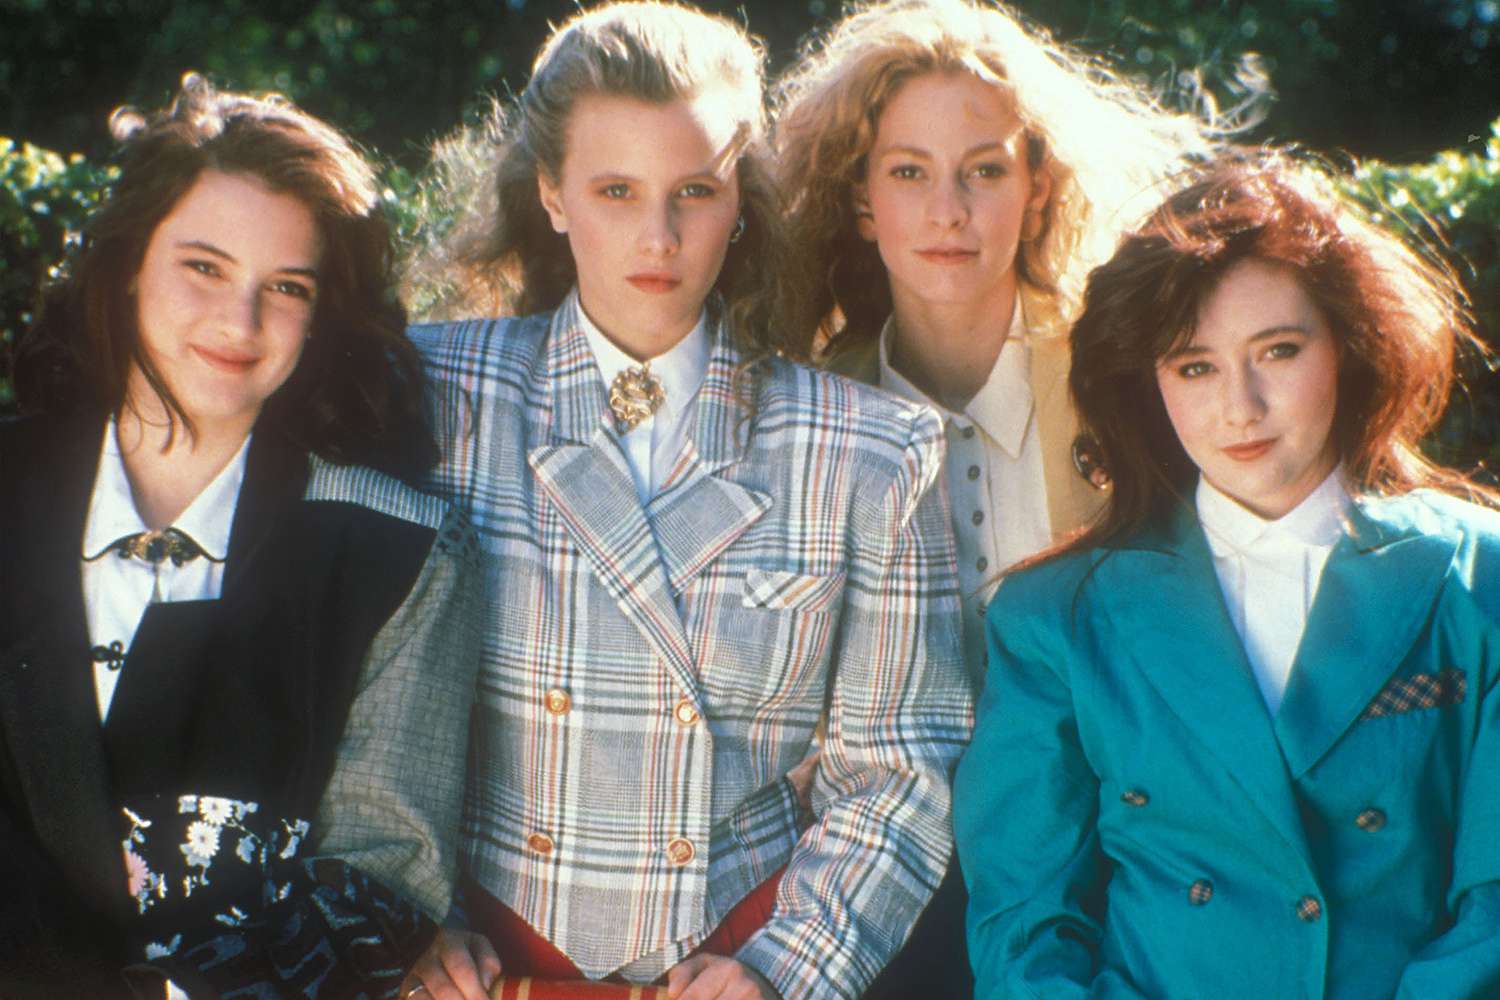 Shannen Doherty's 'Heathers' Costar Praises Her 'Courage' with Cheeky Nods to Cult Classic: 'You Always Had the Balls'